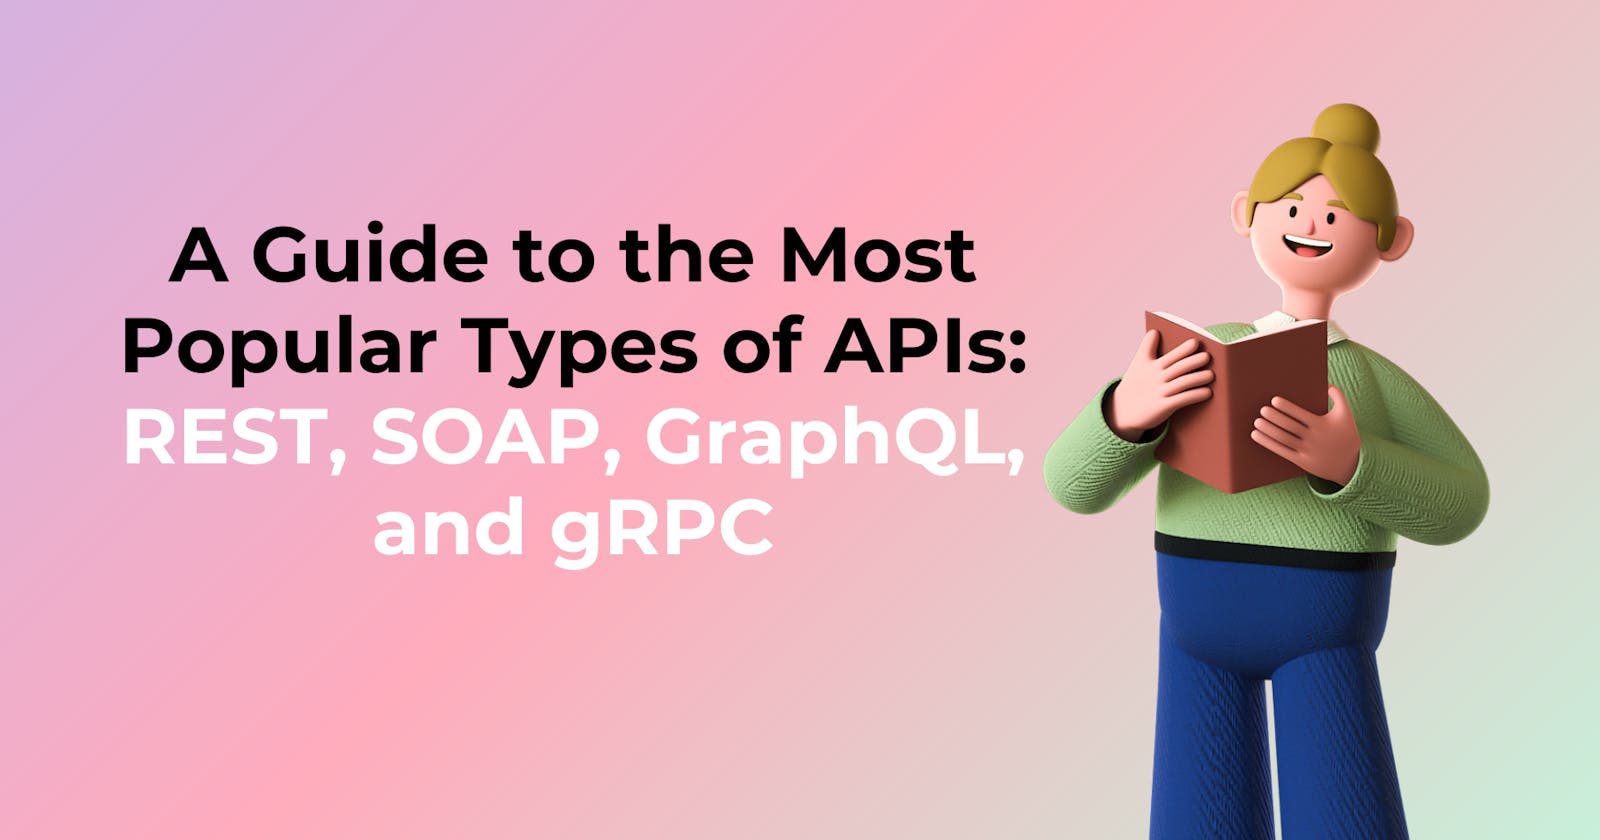 A Guide to the Most Popular Types of APIs: REST, SOAP, GraphQL, and gRPC